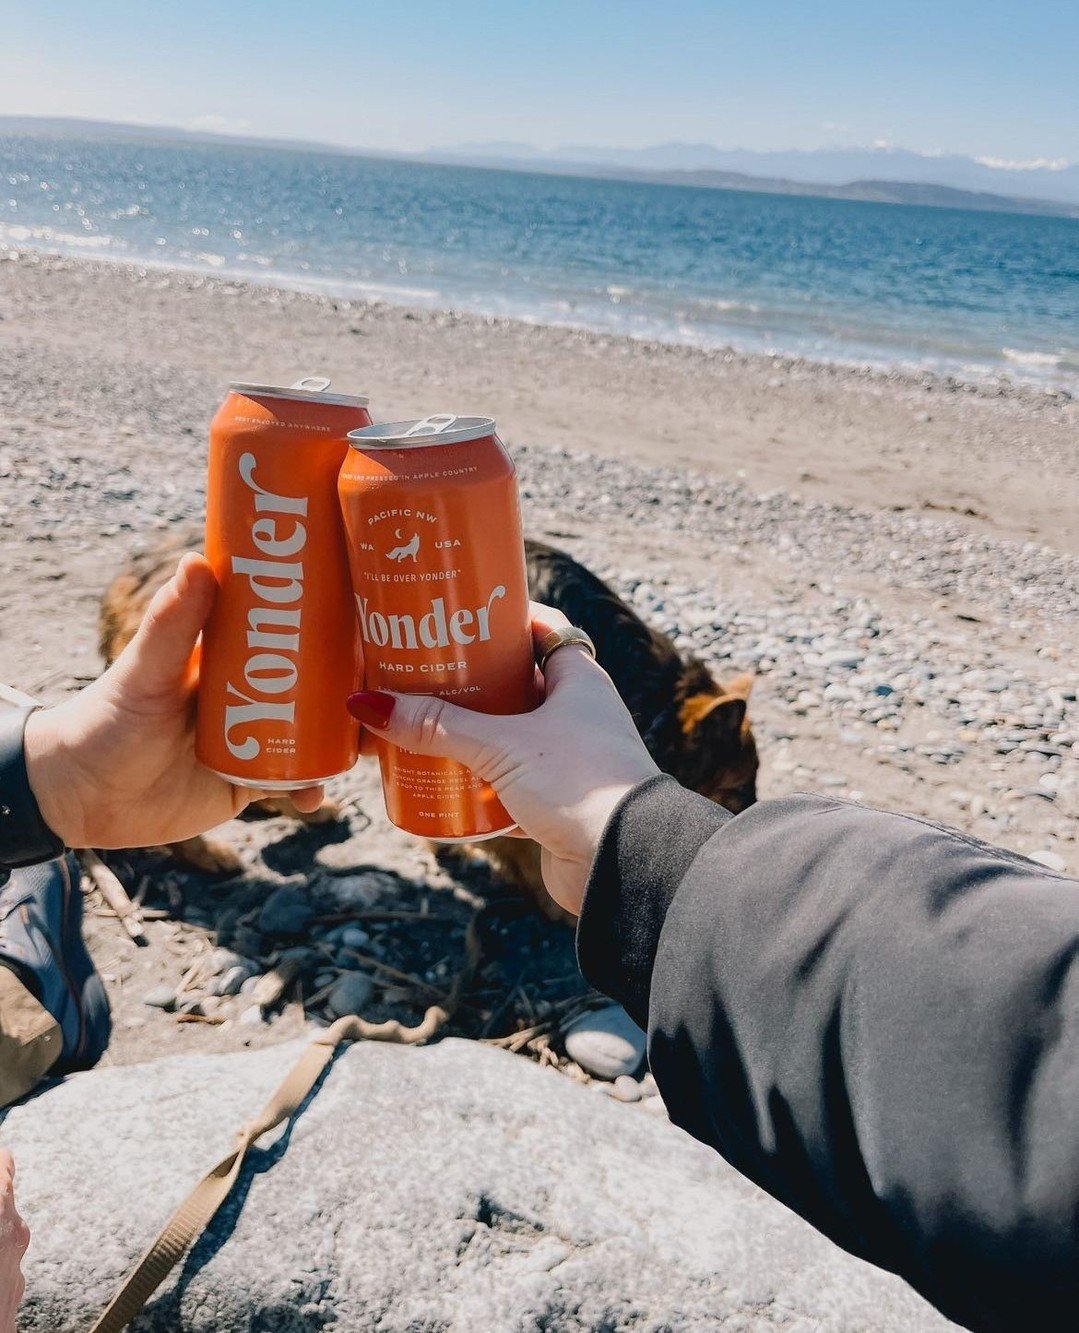 Beach essentials checklist:⁠
⁠
✅️ Friends by your side⁠
✅️ Enjoying the great outdoors⁠
✅️ Sipping on our delicious cider⁠
⁠
Tag your beach squad and let the good times roll!⁠
⁠
📷️: @walker.wanders⁠
⁠
#yondercider #drinkyonder #mazama #borntoroam #i